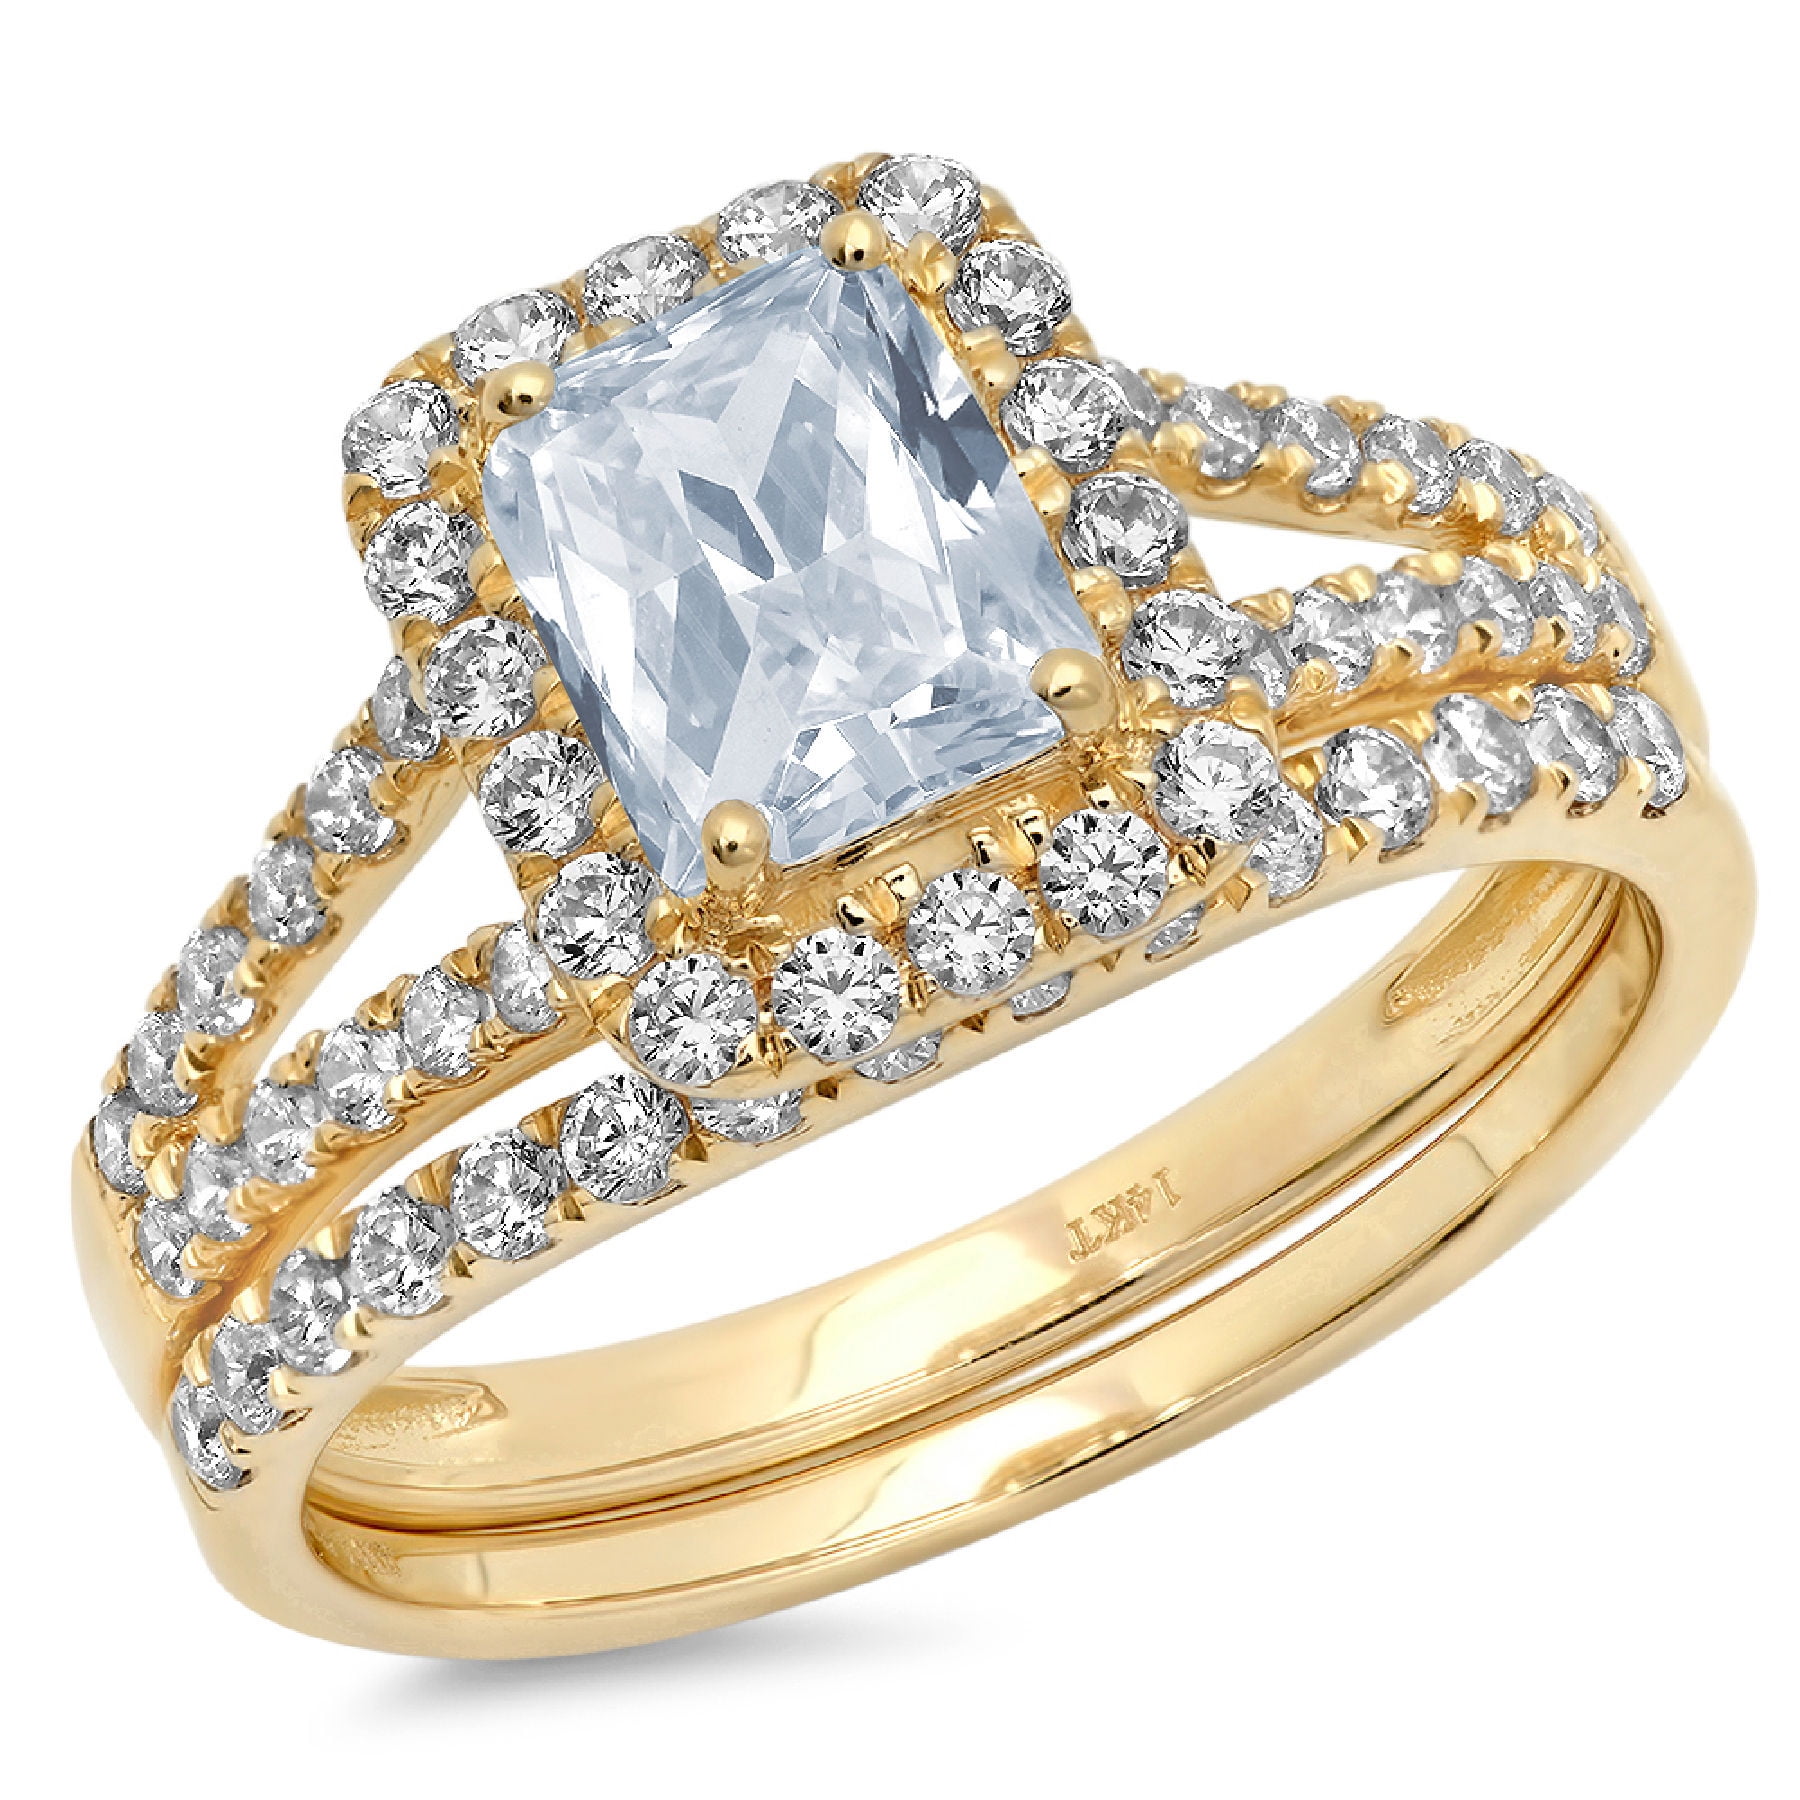 Clara Pucci 1.35 ct Brilliant Oval Cut CZ Designer Solitaire Ring Band in Solid 14k Yellow Gold 